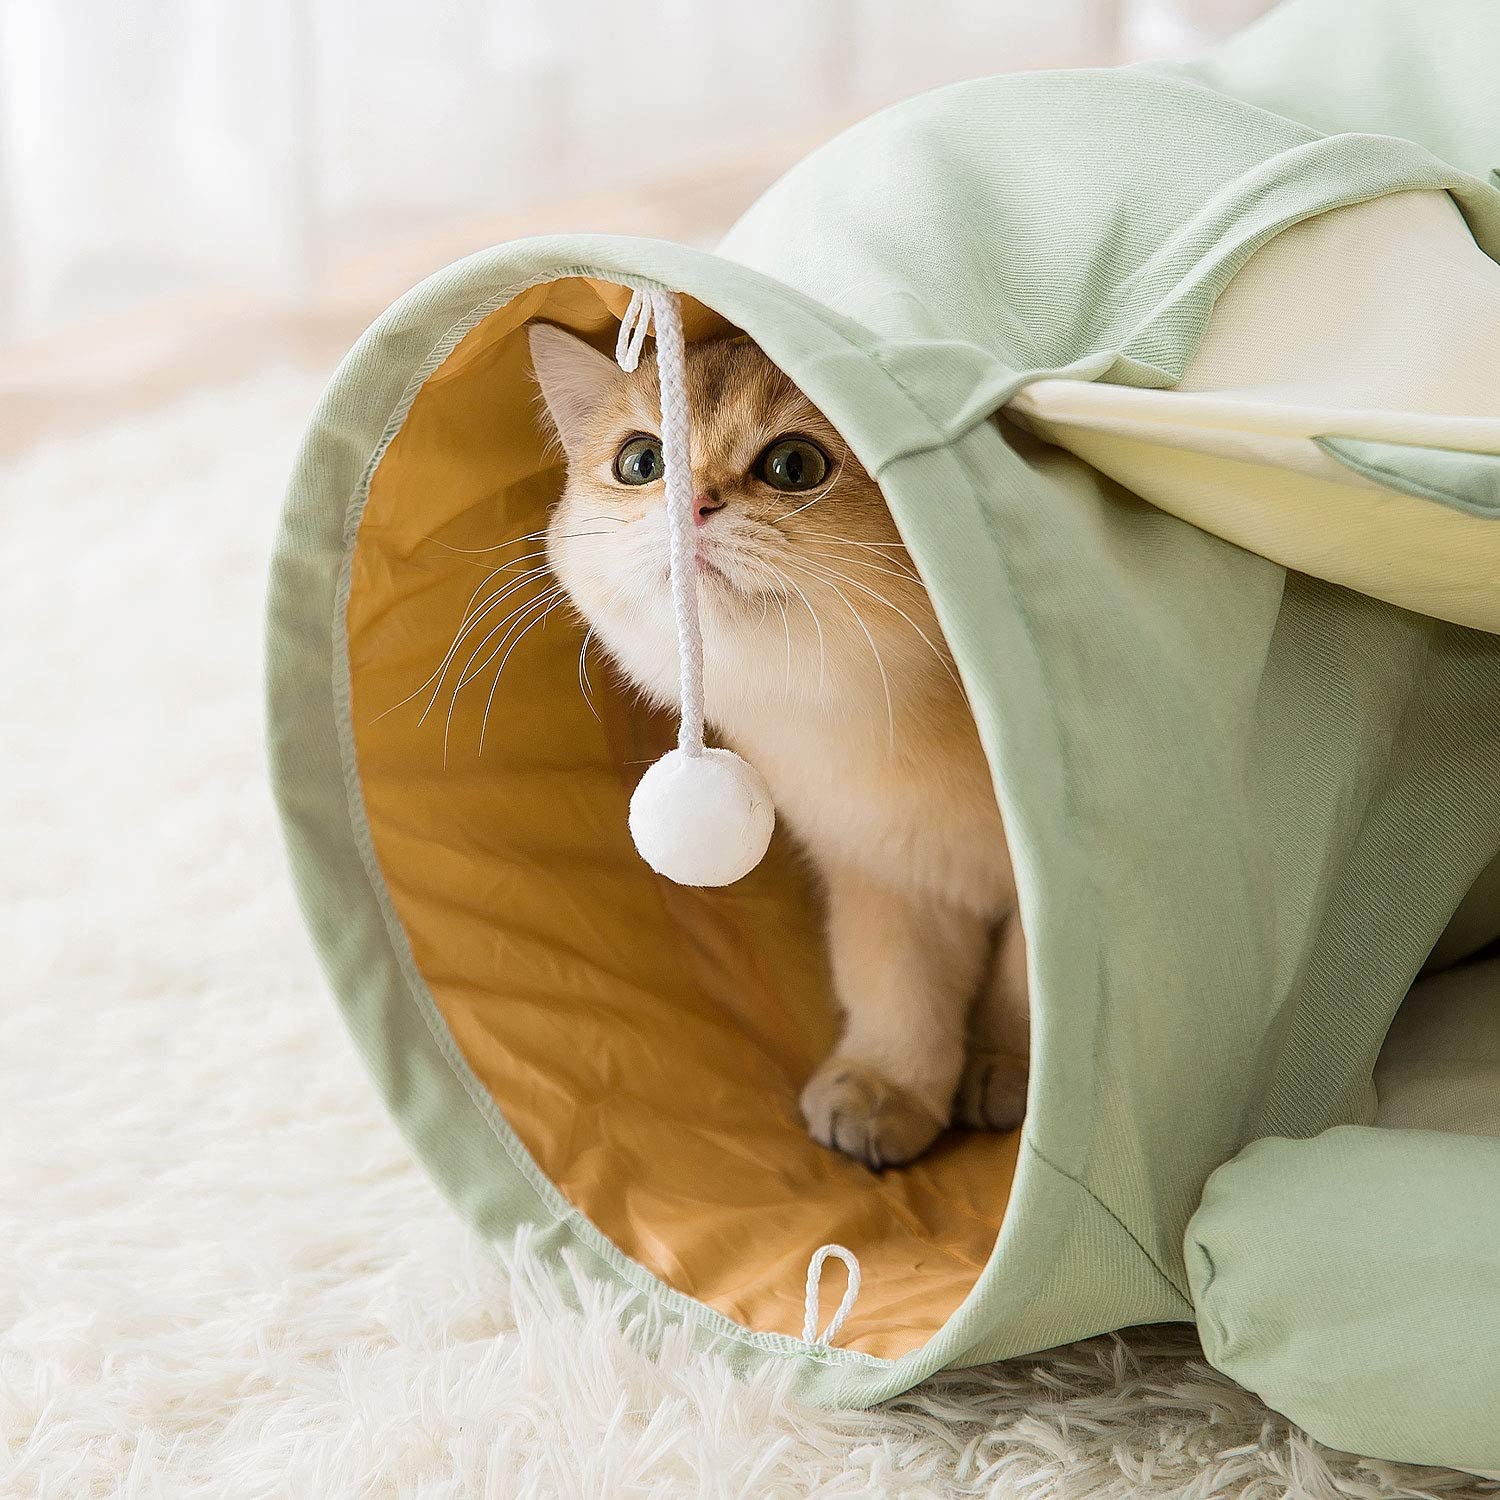 Cat Bed Tunnel - 4 Seasons Home Gadgets